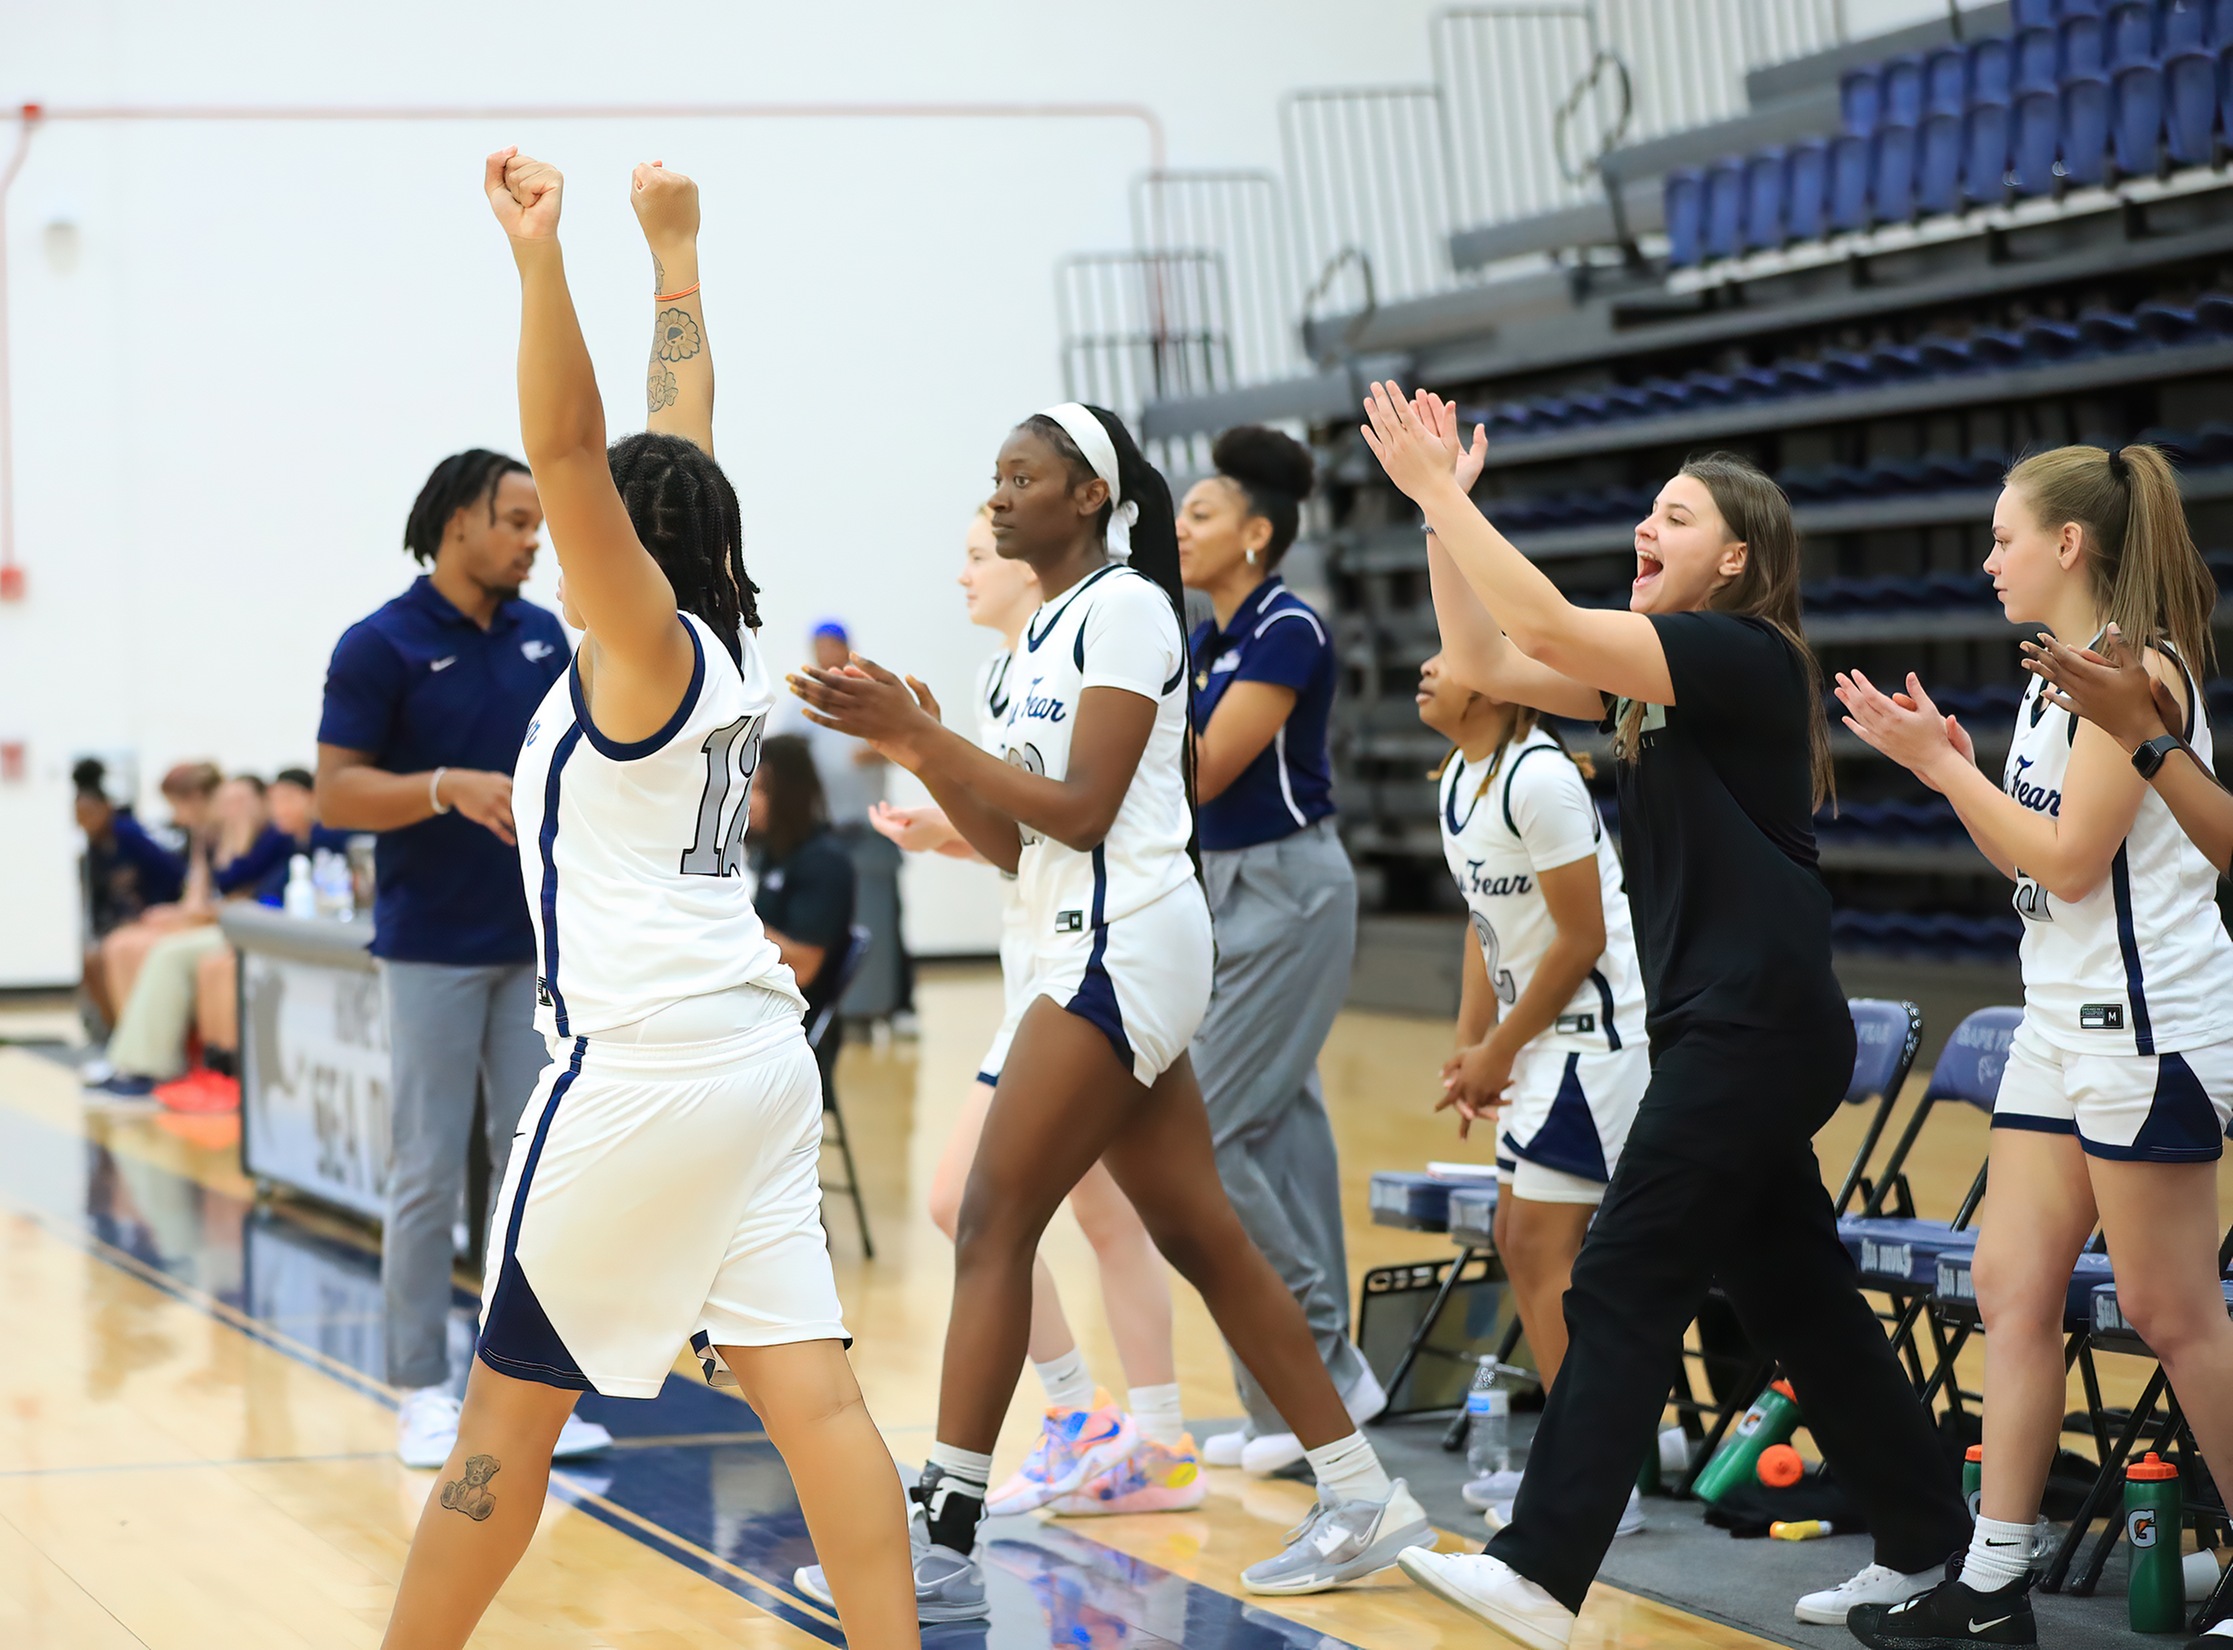 Multiple CFCC Women's Basketball players cheering and coming onto the court to celebrate a good play